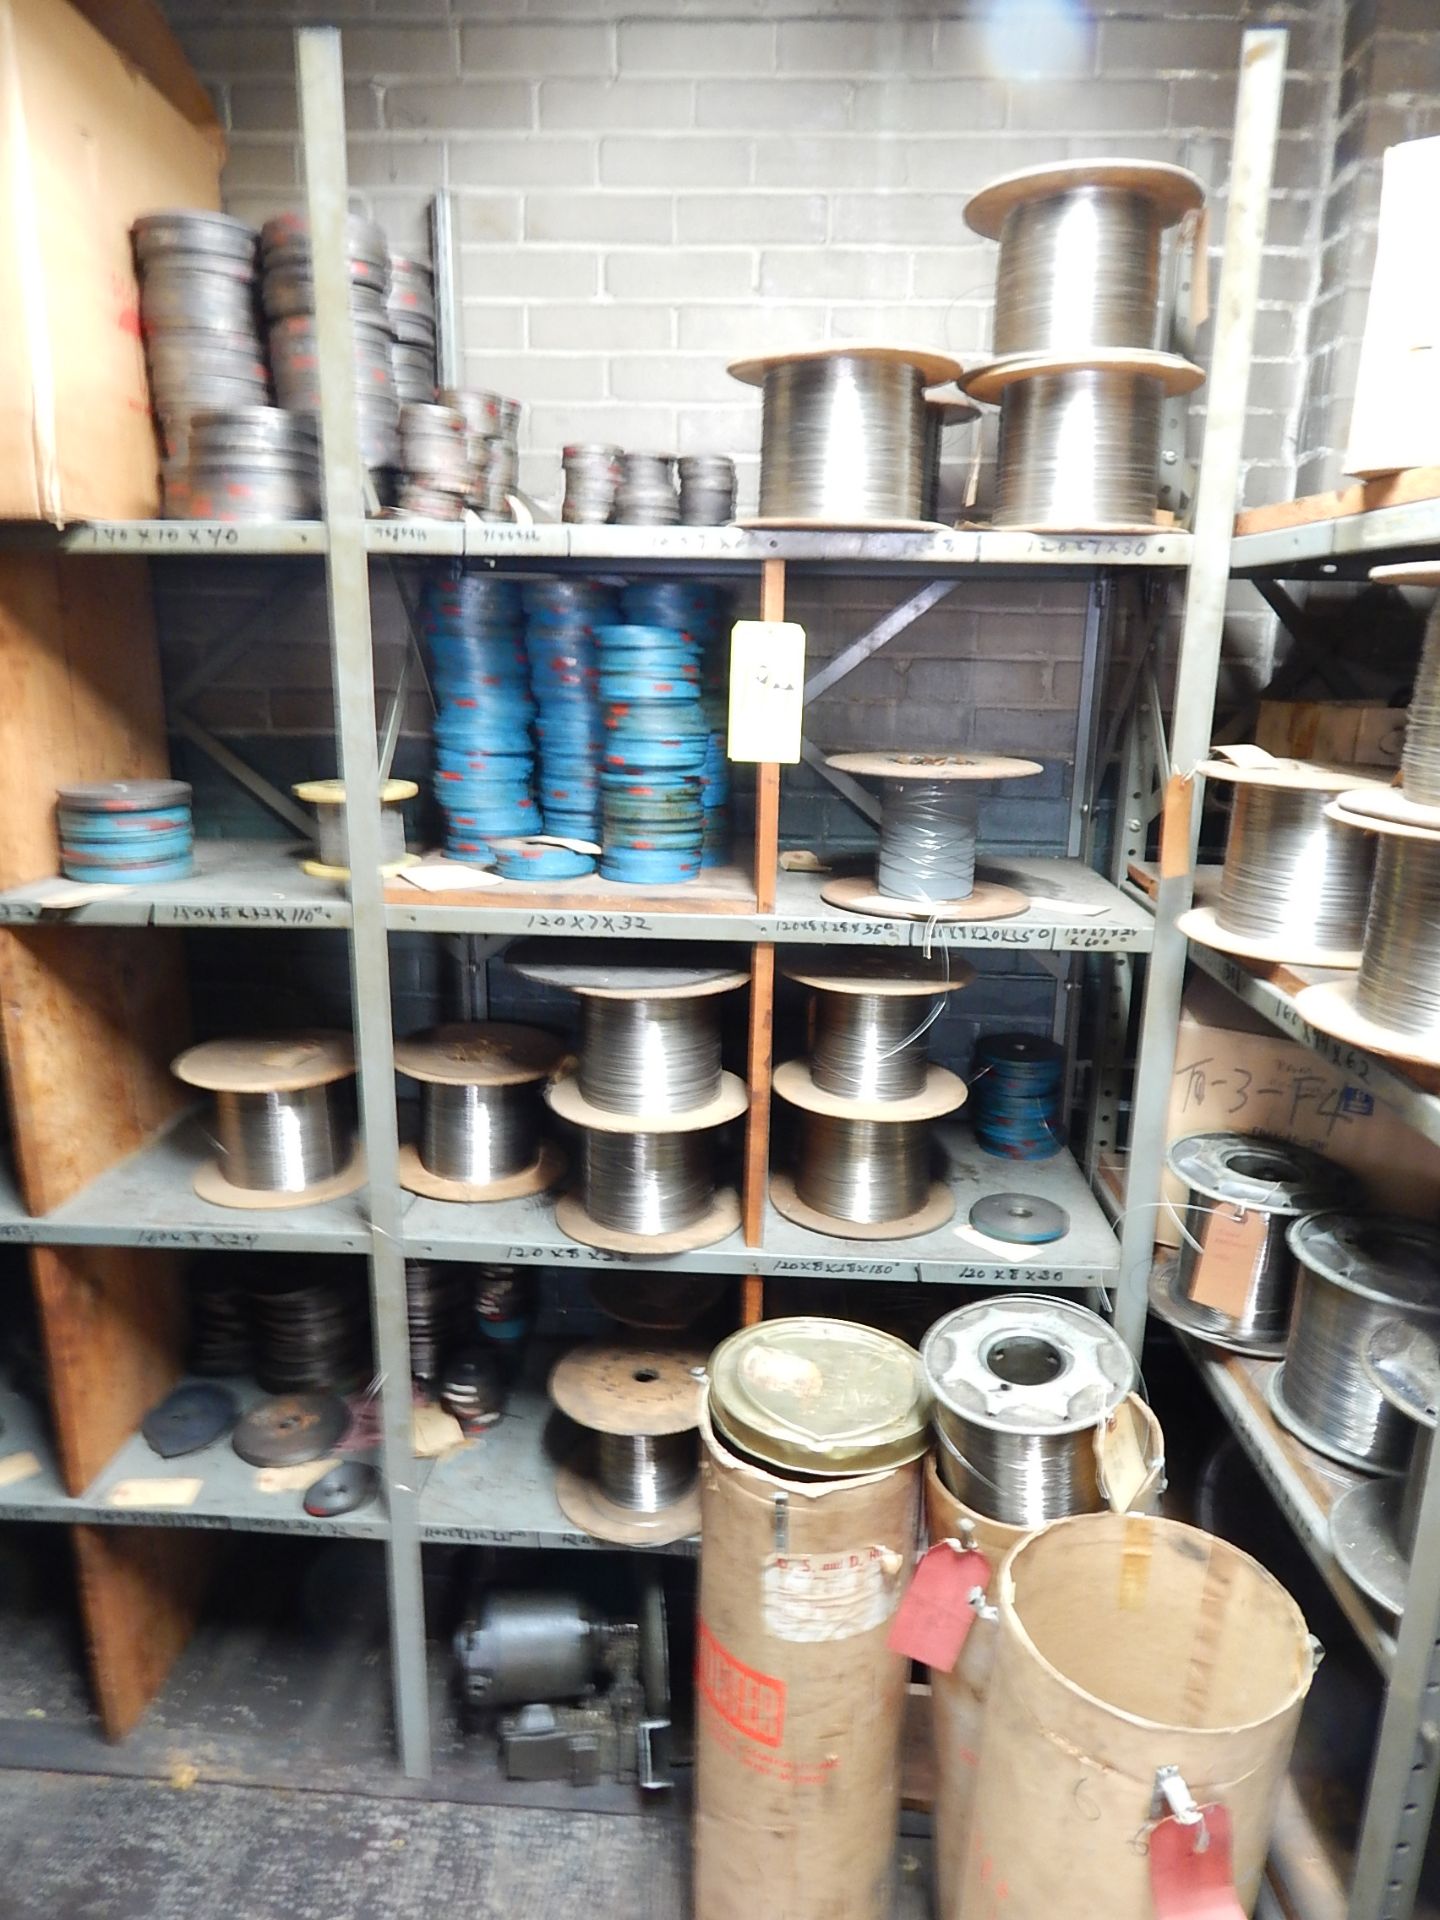 Contents of Storage Room; Wire Spools, Machine Cams, Metal Shelving, Banding Material, and - Image 2 of 3